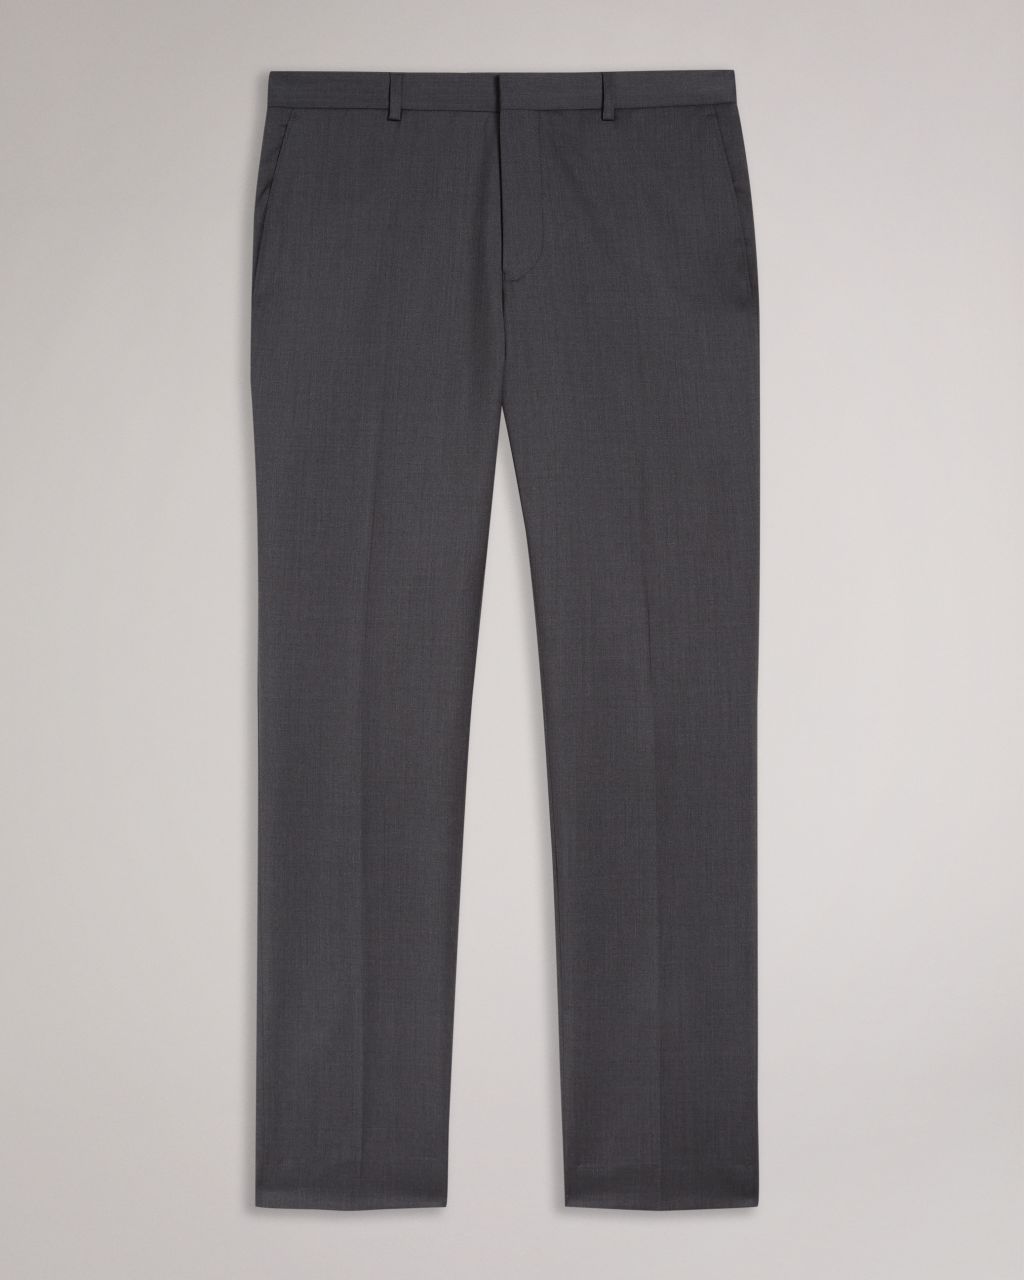 Slim Fit Charcoal Twill Suit Trousers